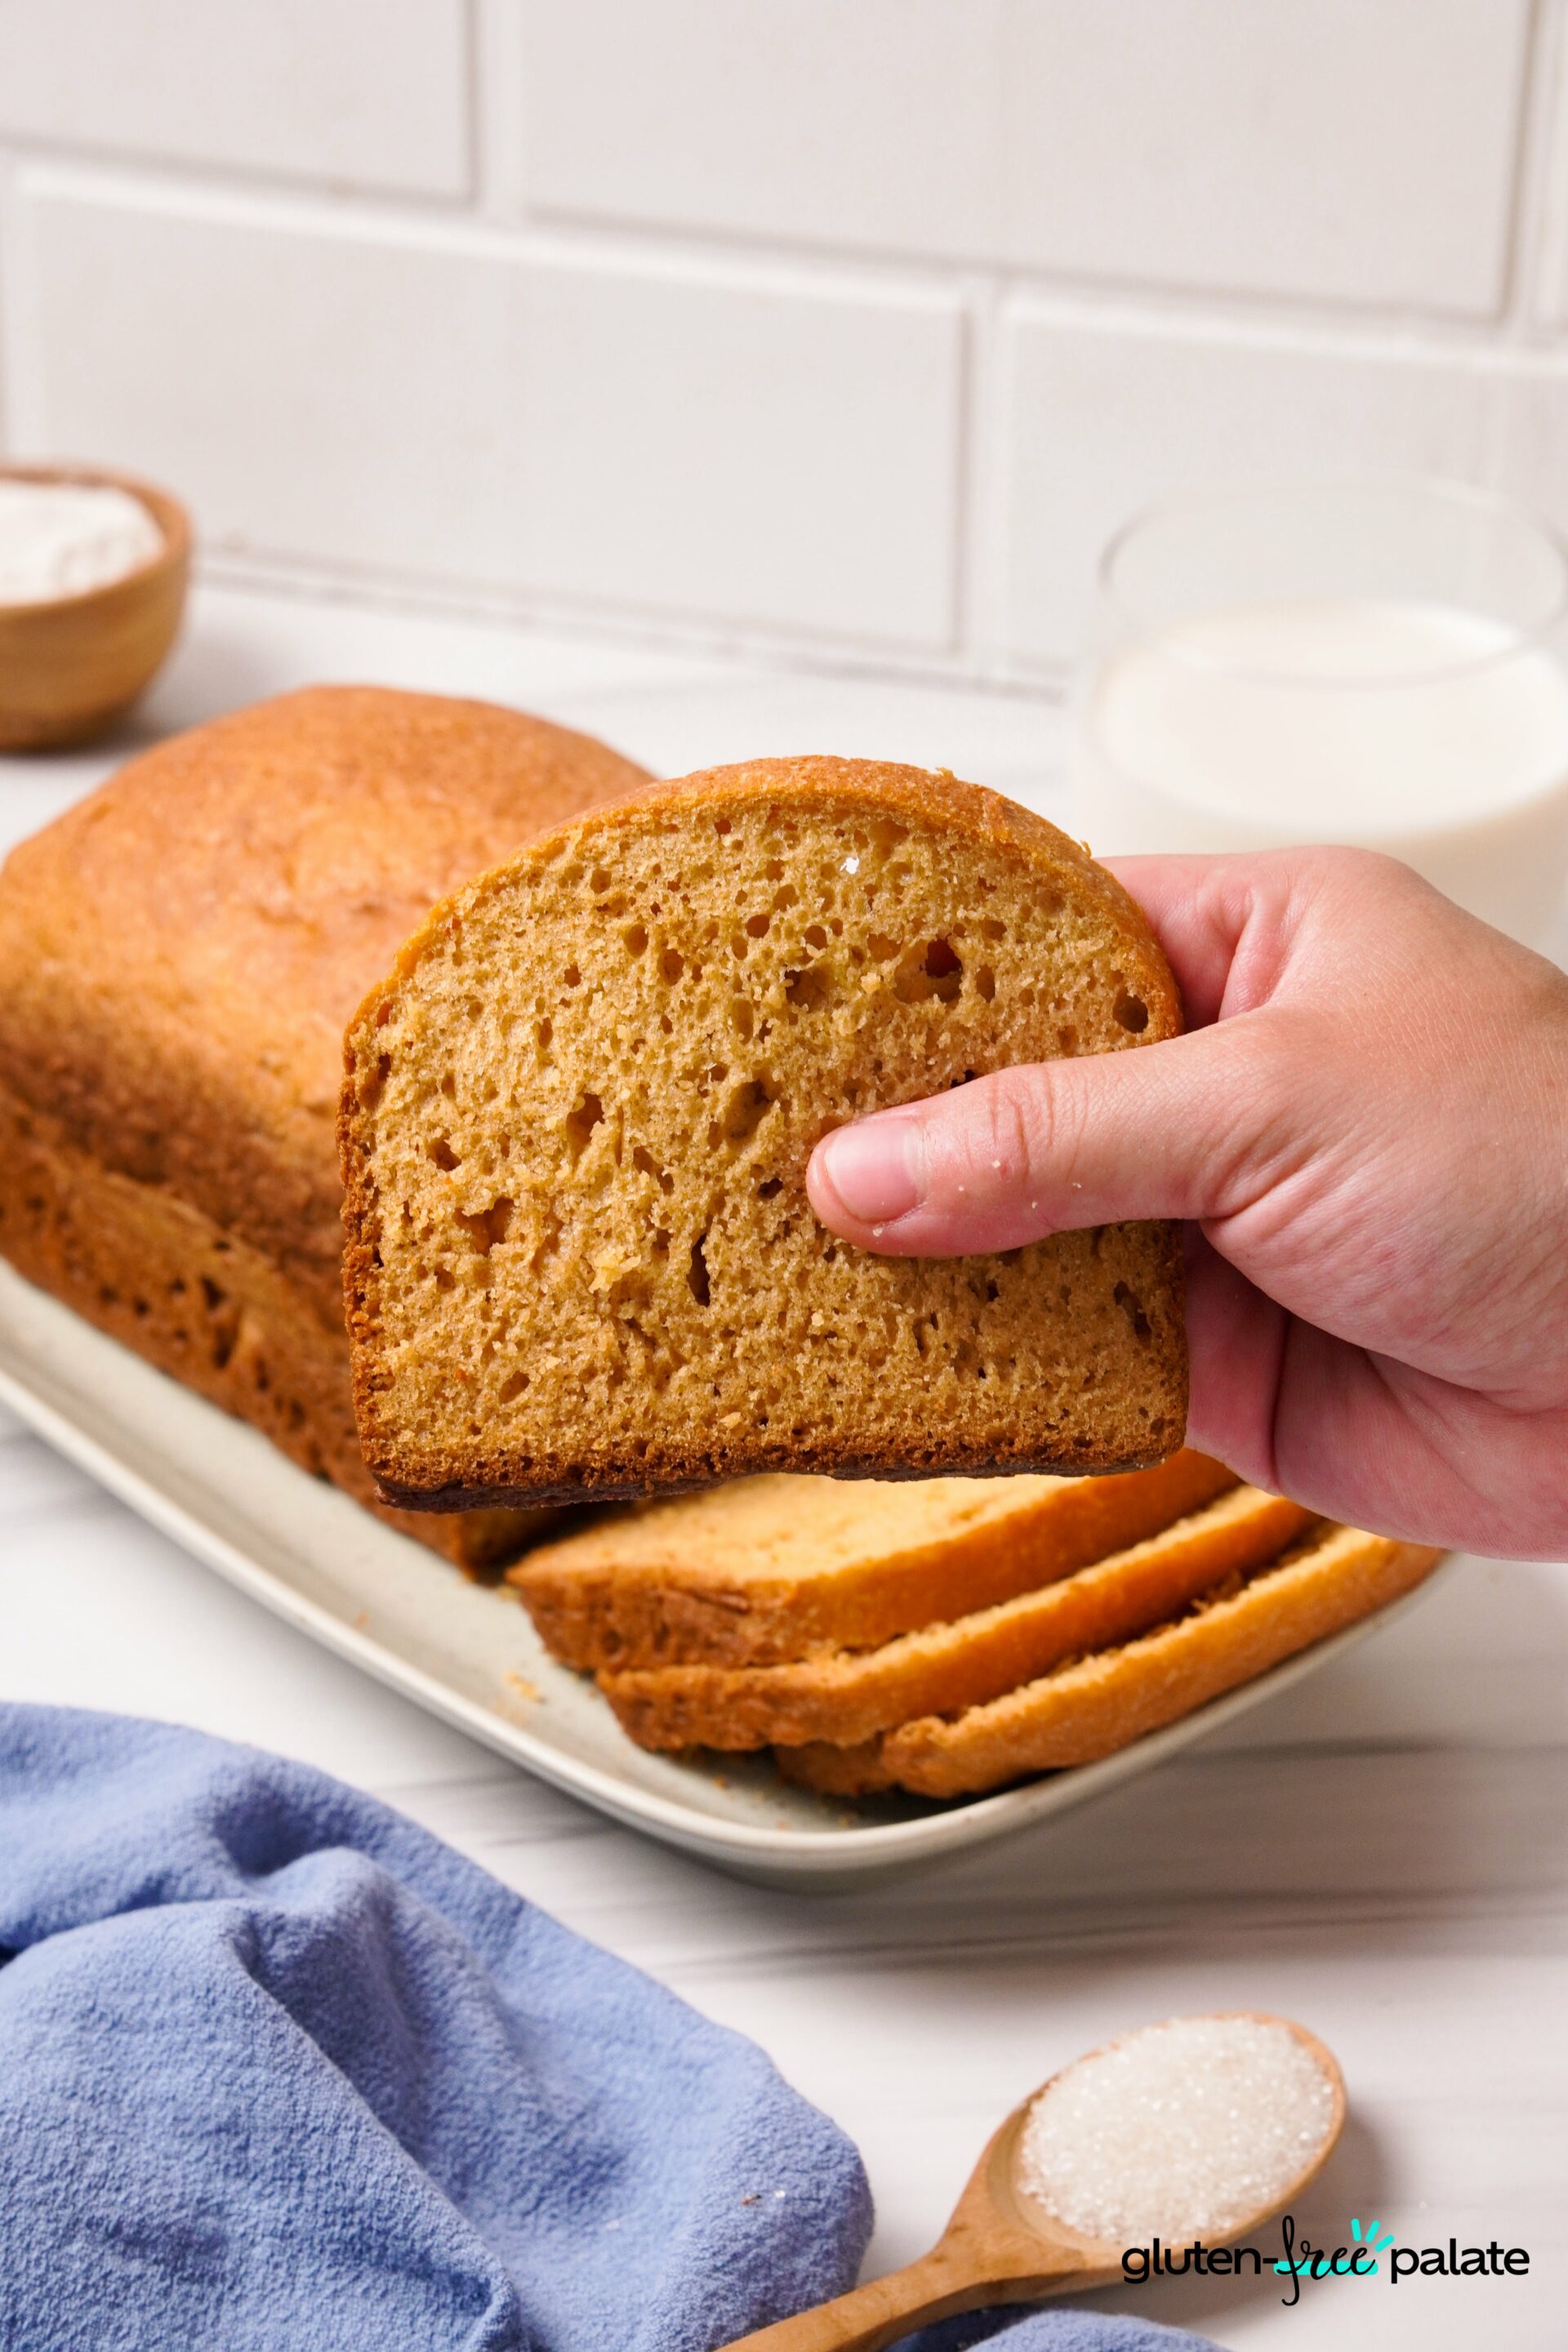 Gluten-Free Yeast-Free Bread sliced and once slice being picked up by a hand.